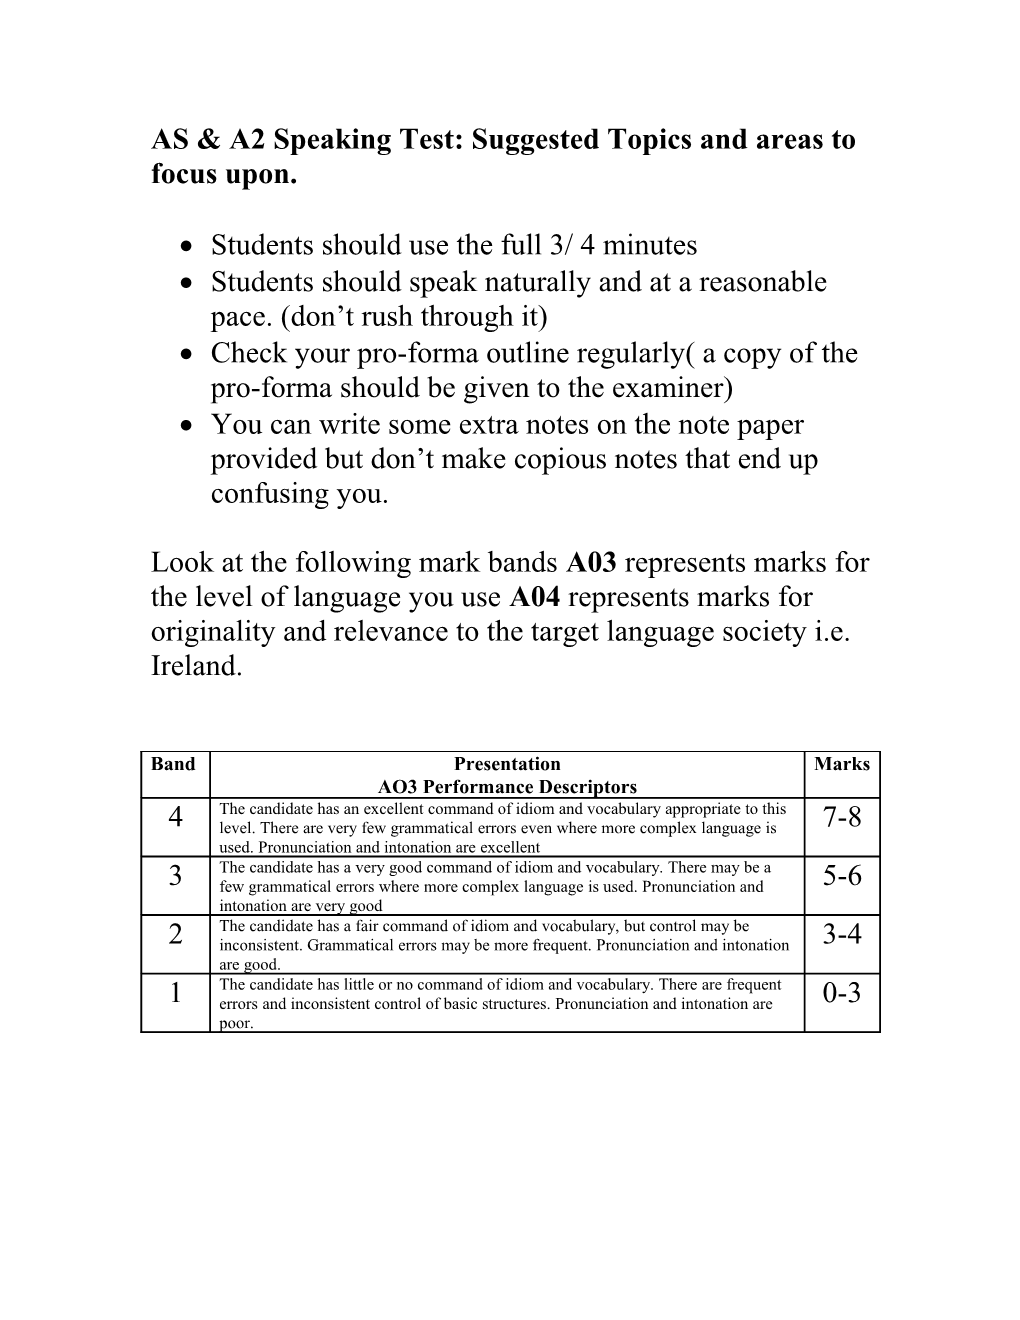 AS & A2 Speaking Test: Suggested Topics and Areas to Focus Upon